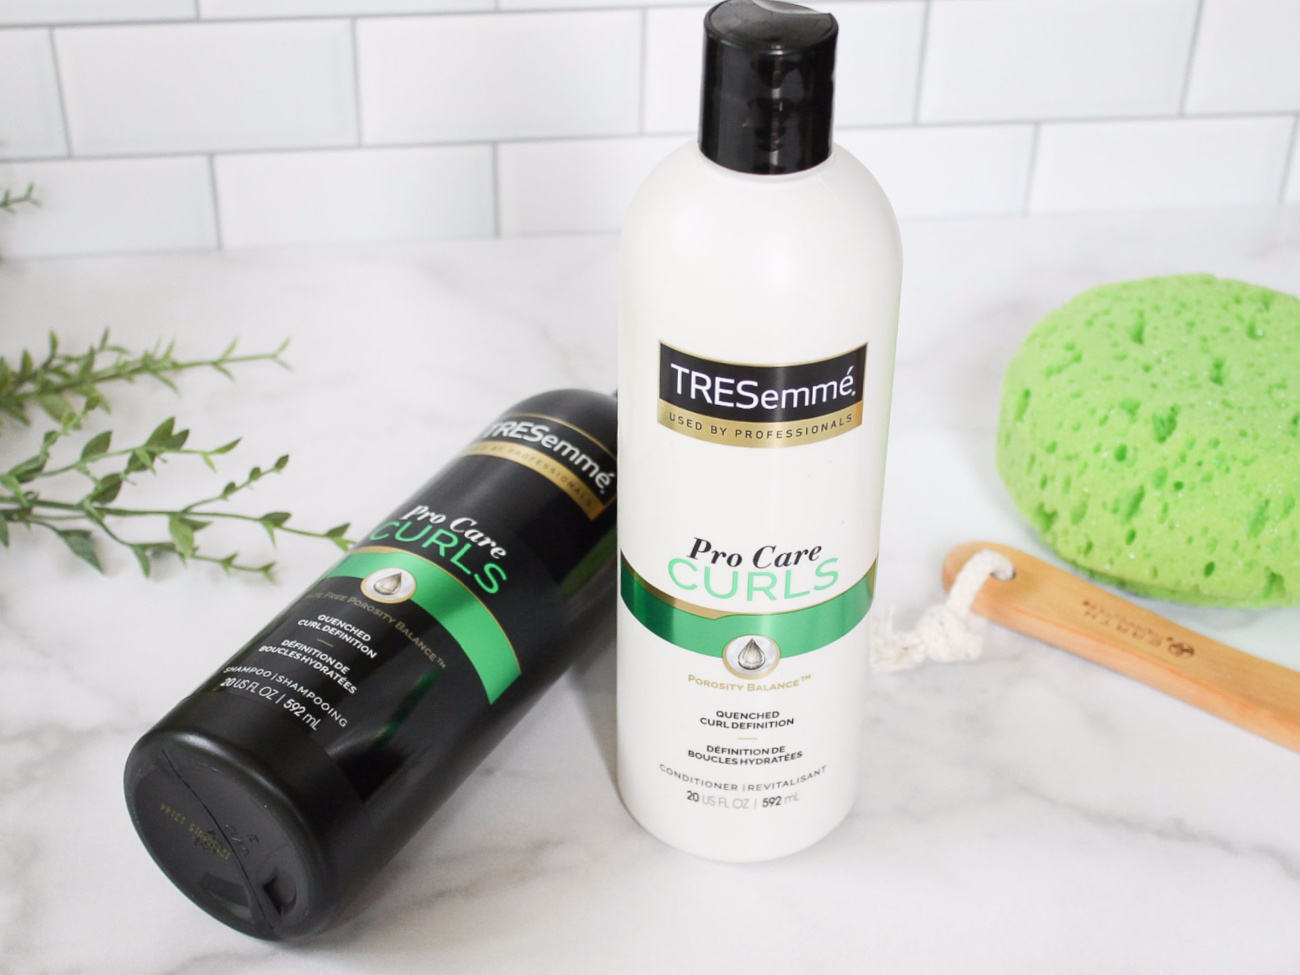 TRESemme Pro Collection As Low As $1.75 At Publix on I Heart Publix